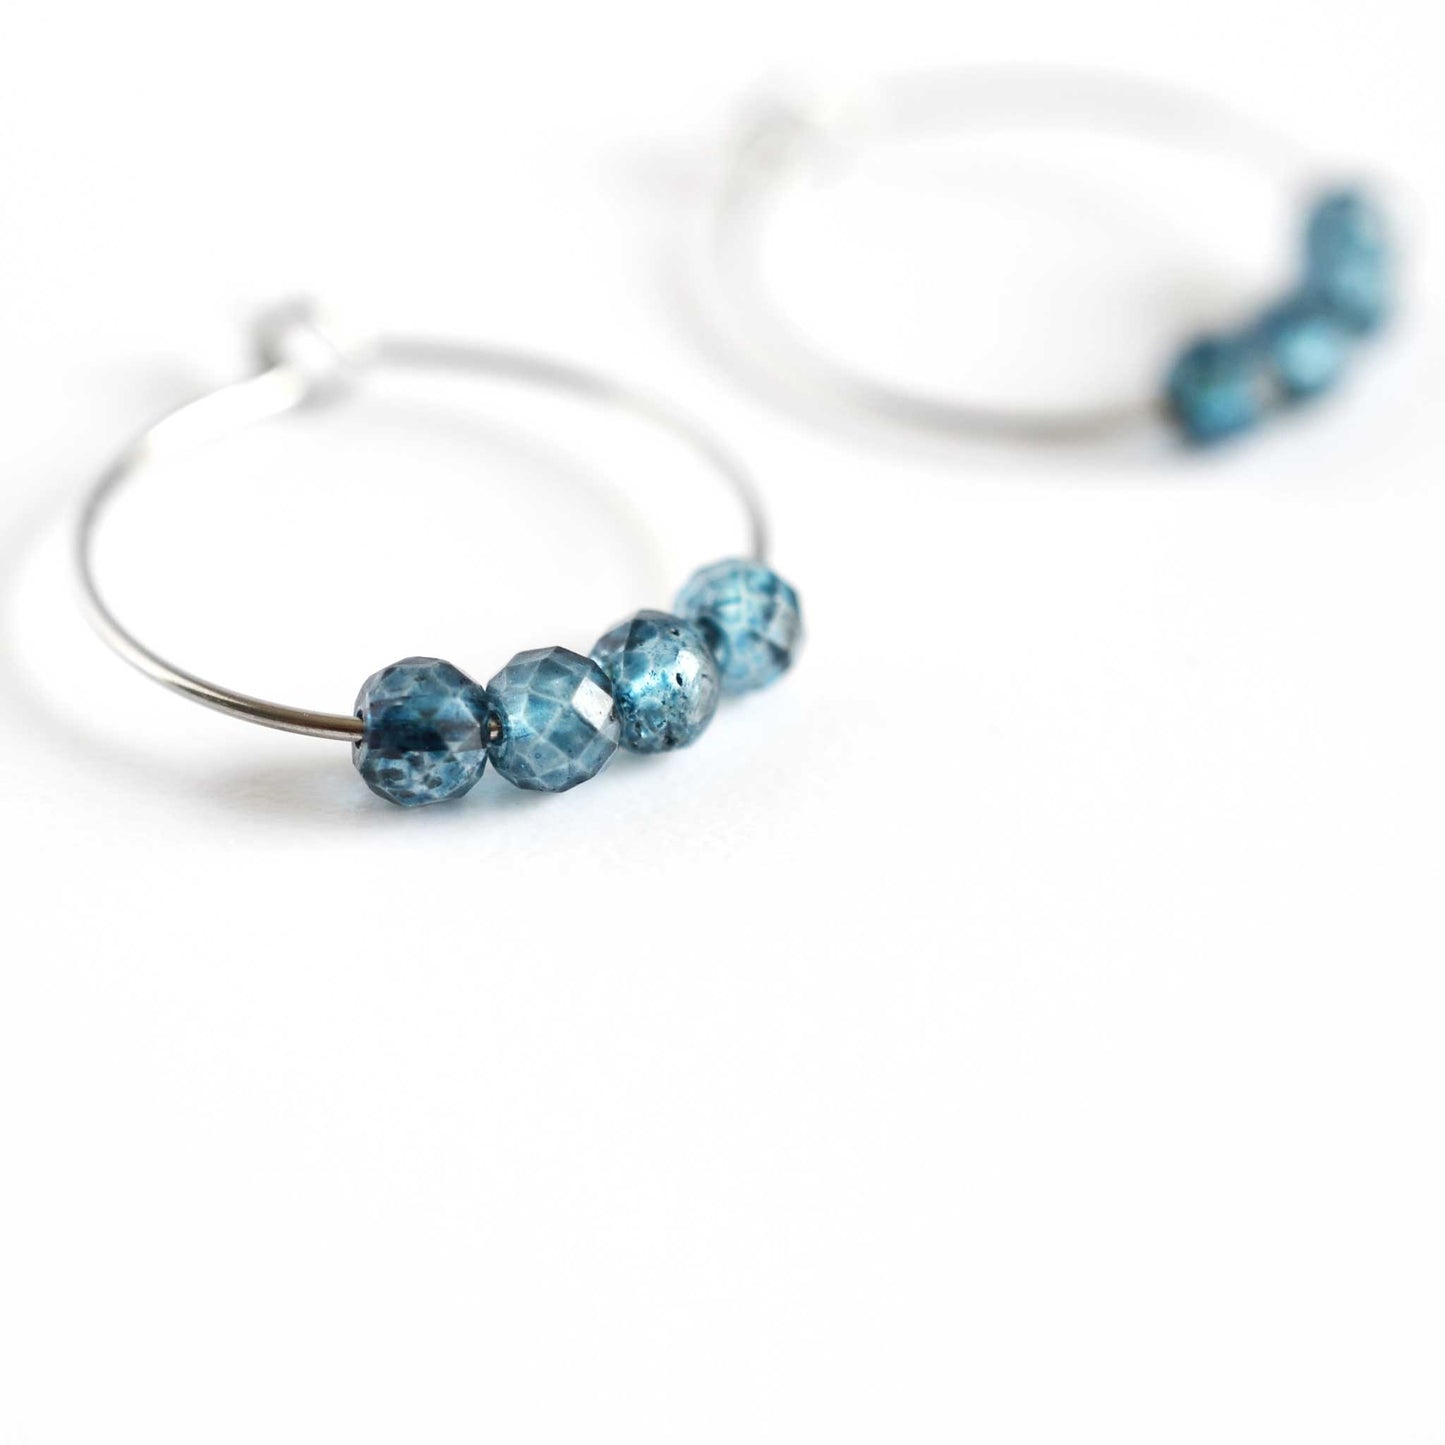 Close up of Topaz hoop earrings with four small round faceted blue Topaz gemstone beads